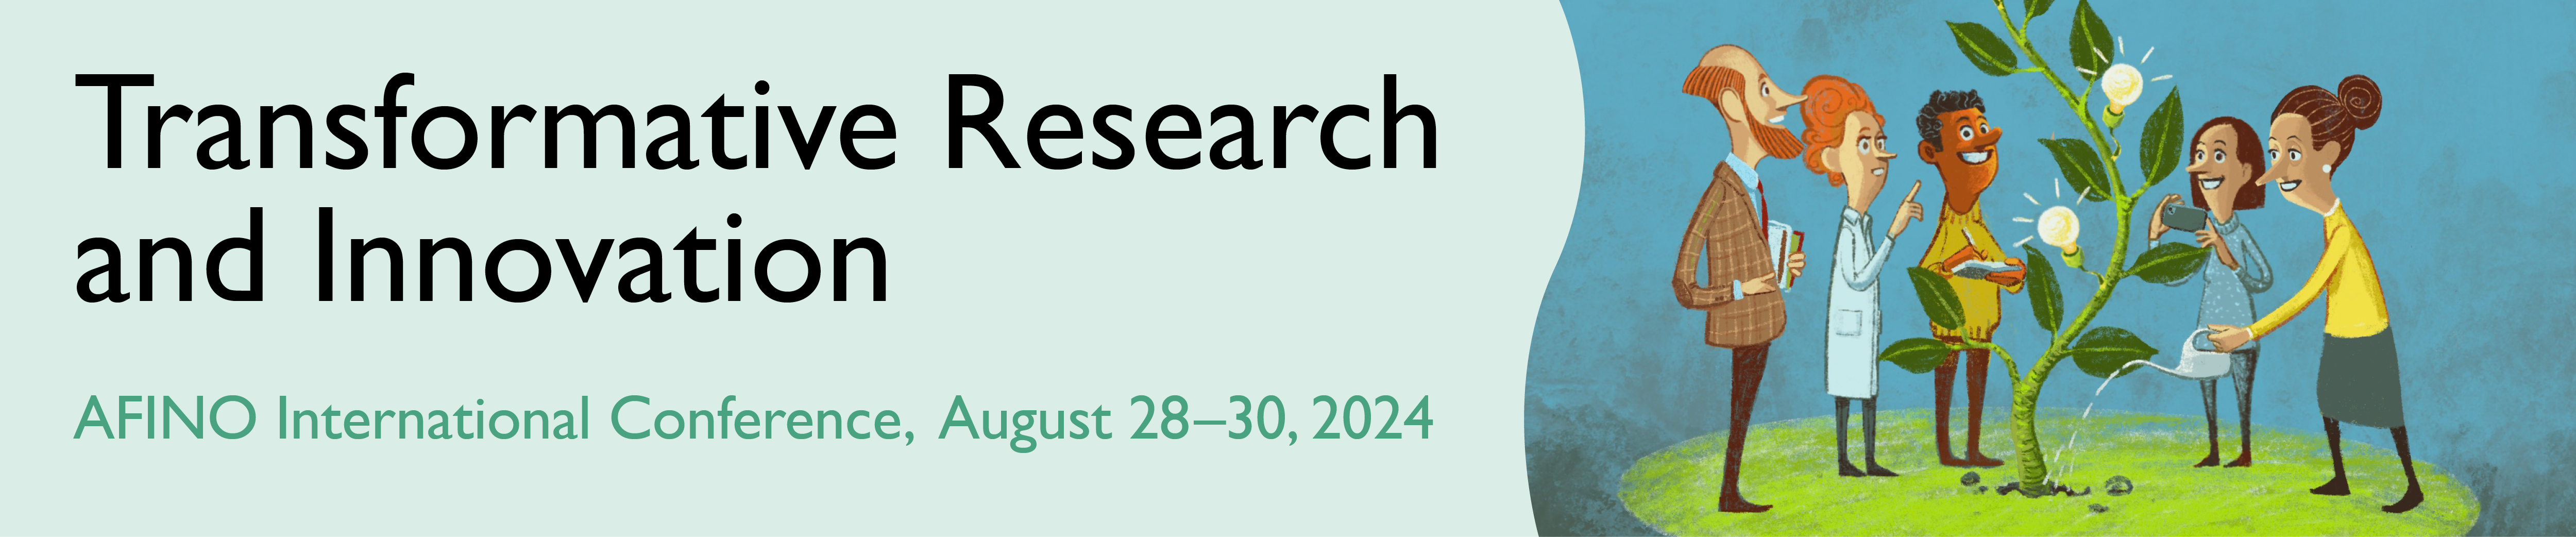 Illustration and banner with text "Transformative Research and Innovation, AFINO International Conference, 28-30 August 2024"